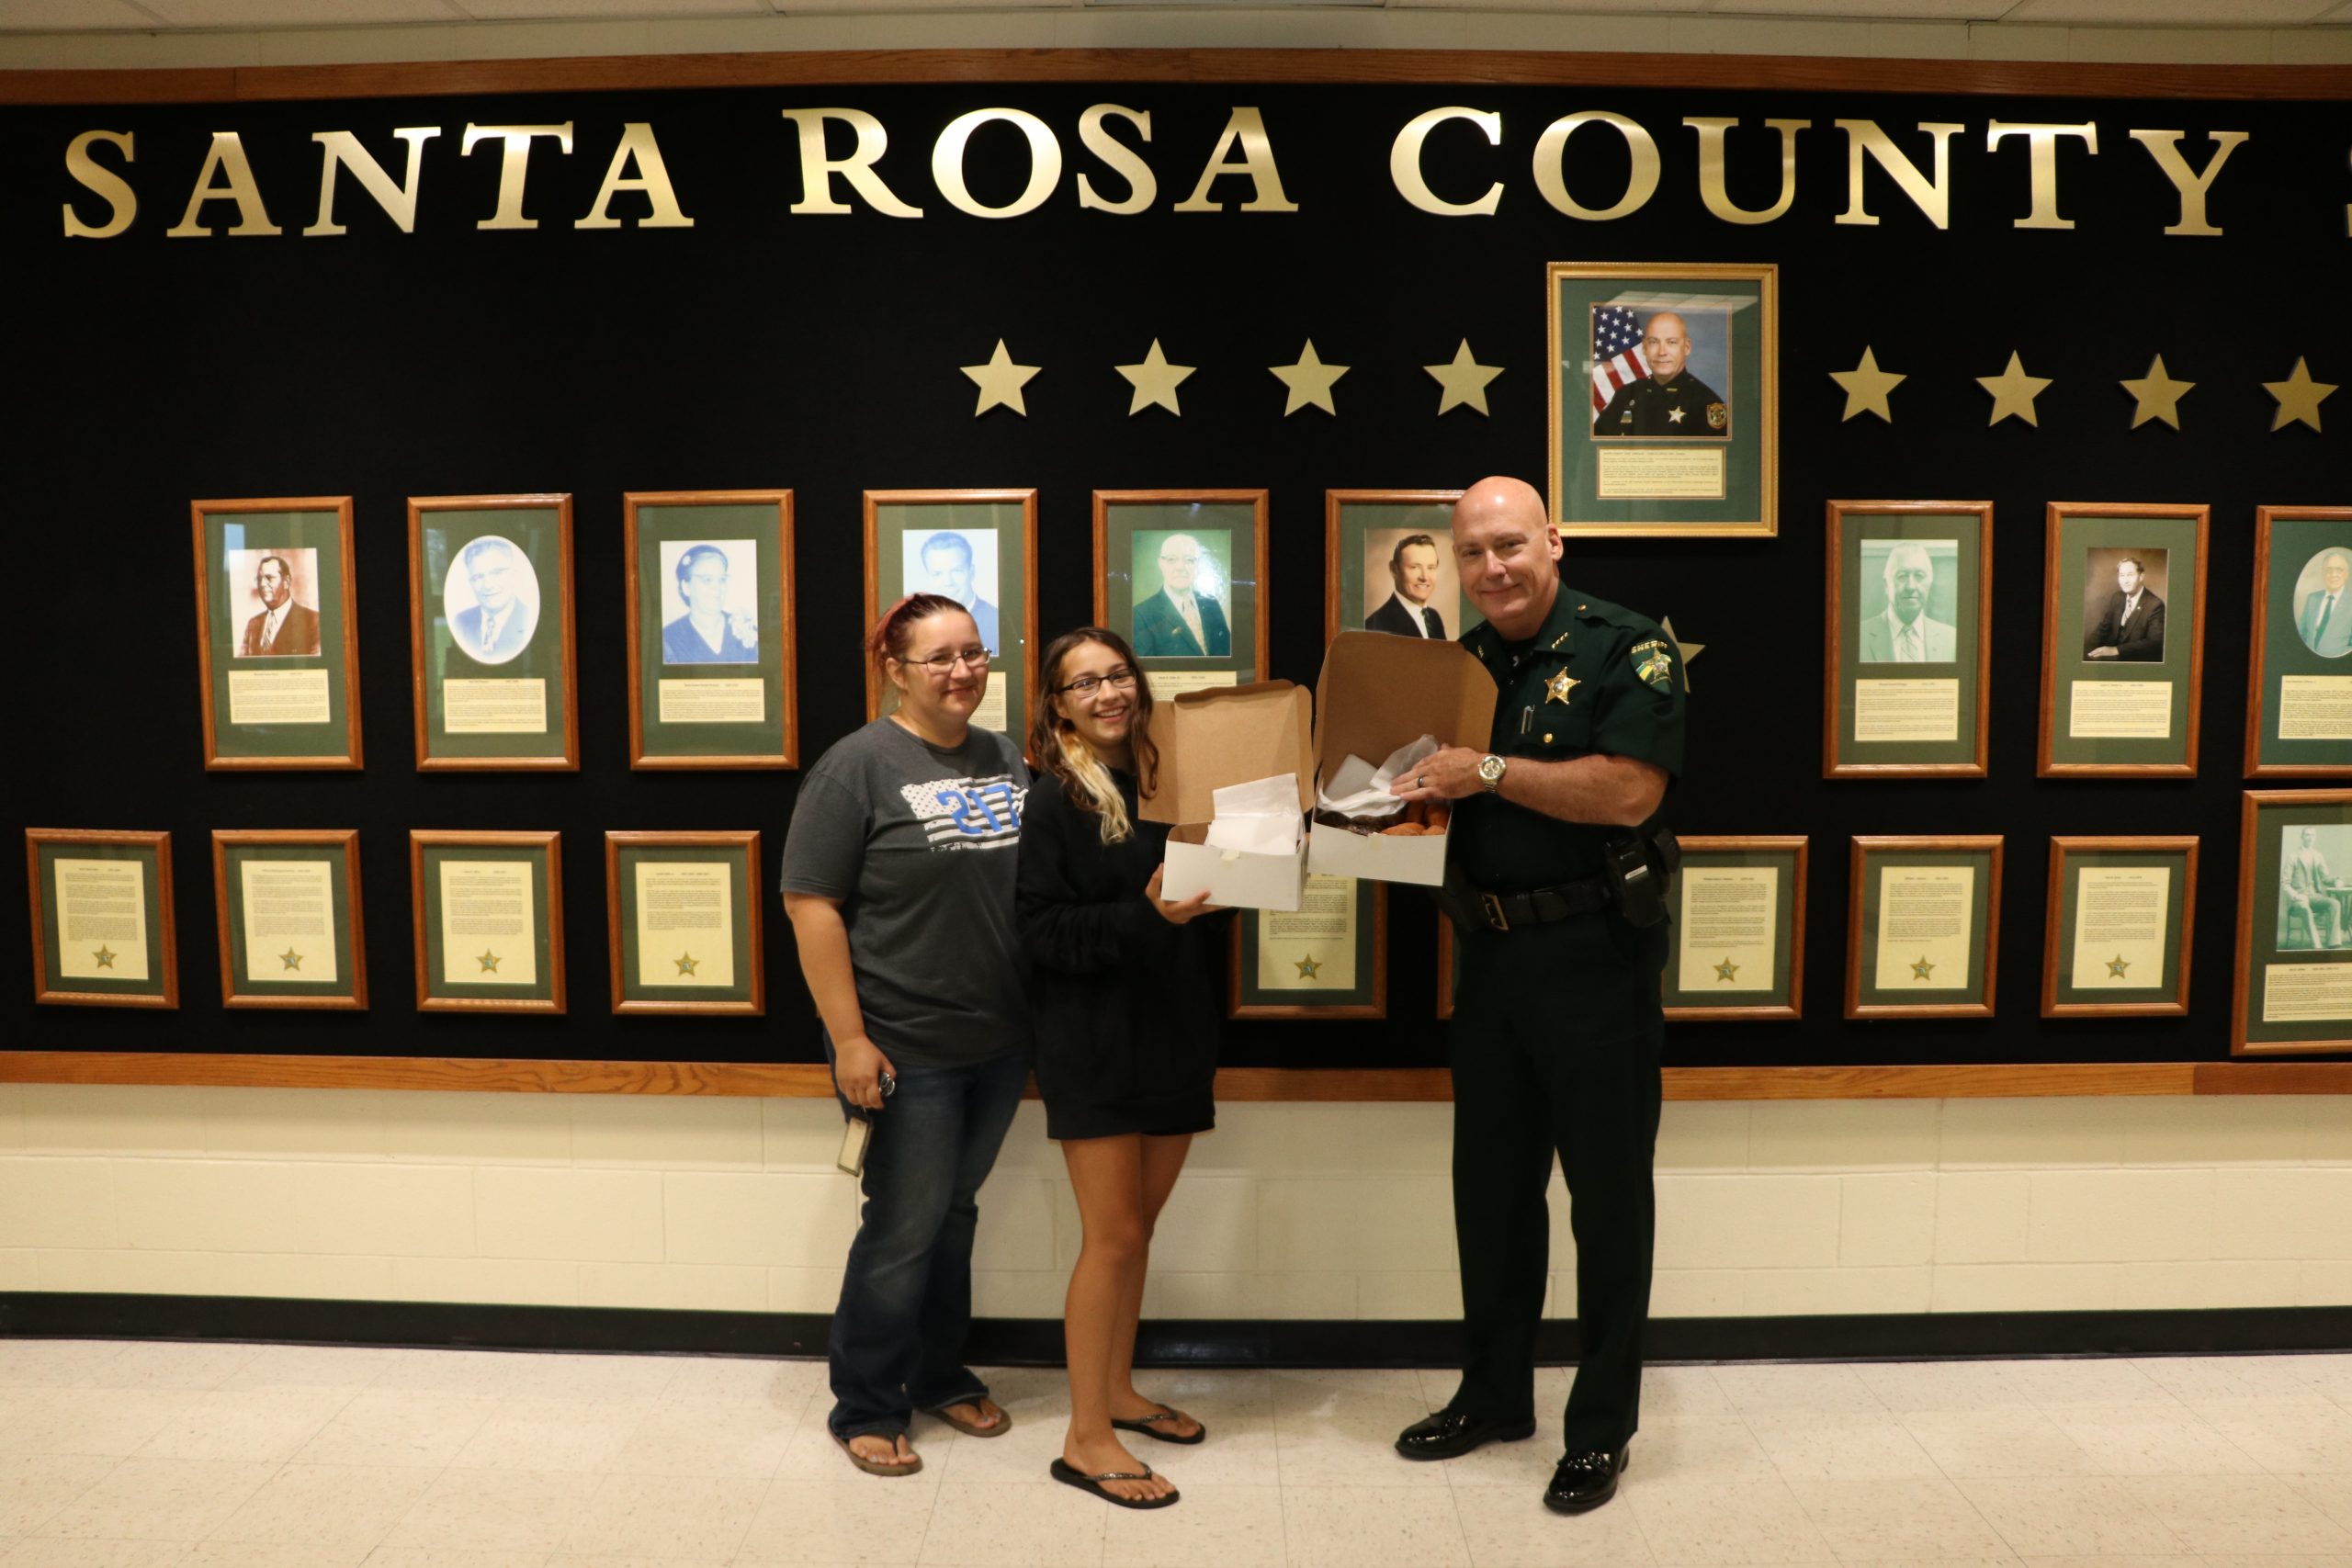 Two women and a sheriff's deputy smiling while standing in front of a wall titled "santa rosa county" adorned with framed portraits and stars.